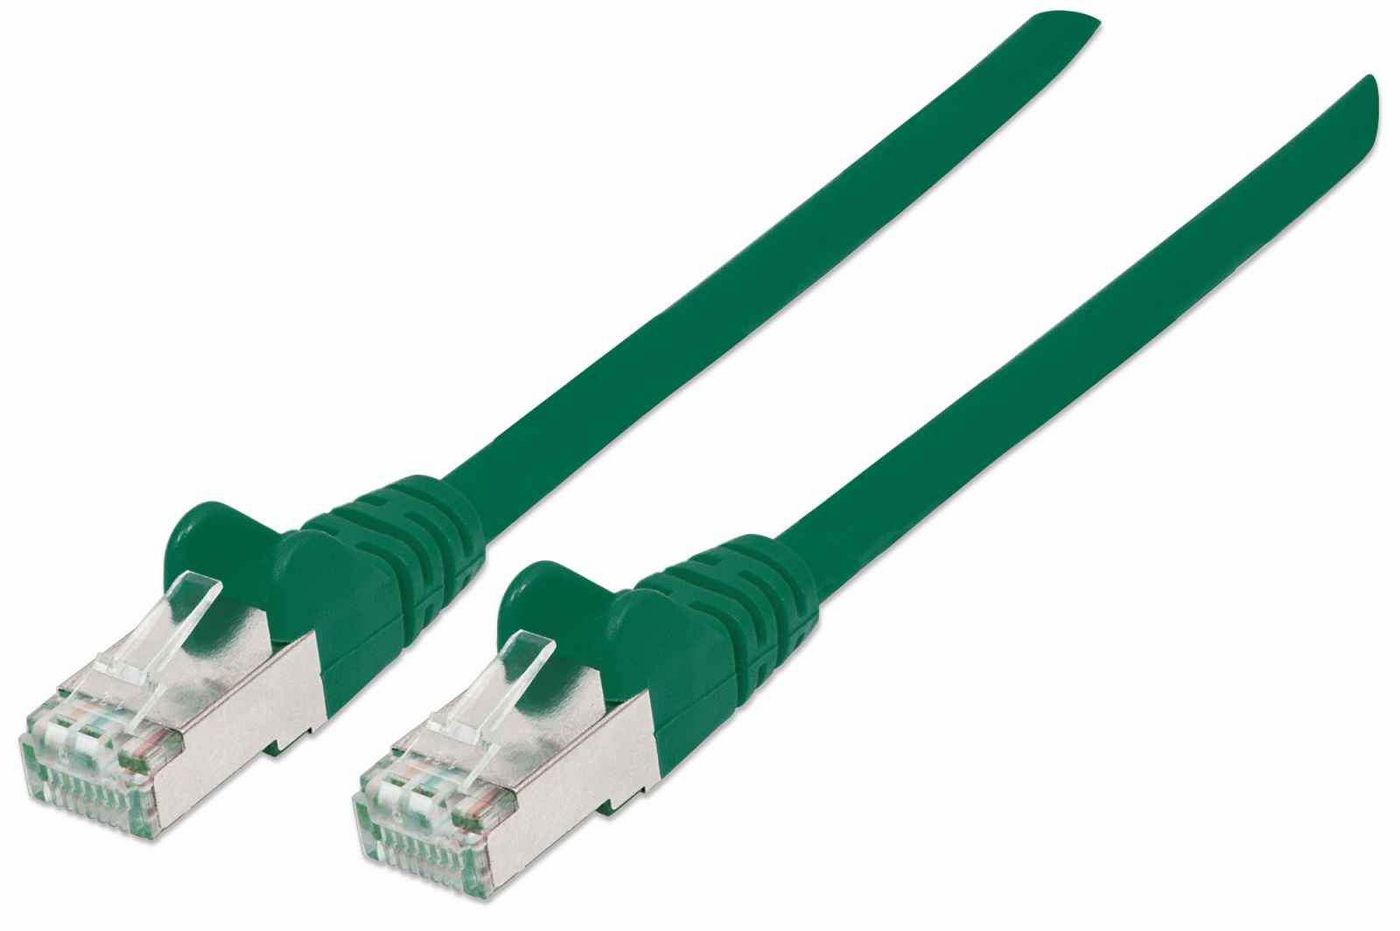 Intellinet 741071 High Performance Network Cable 